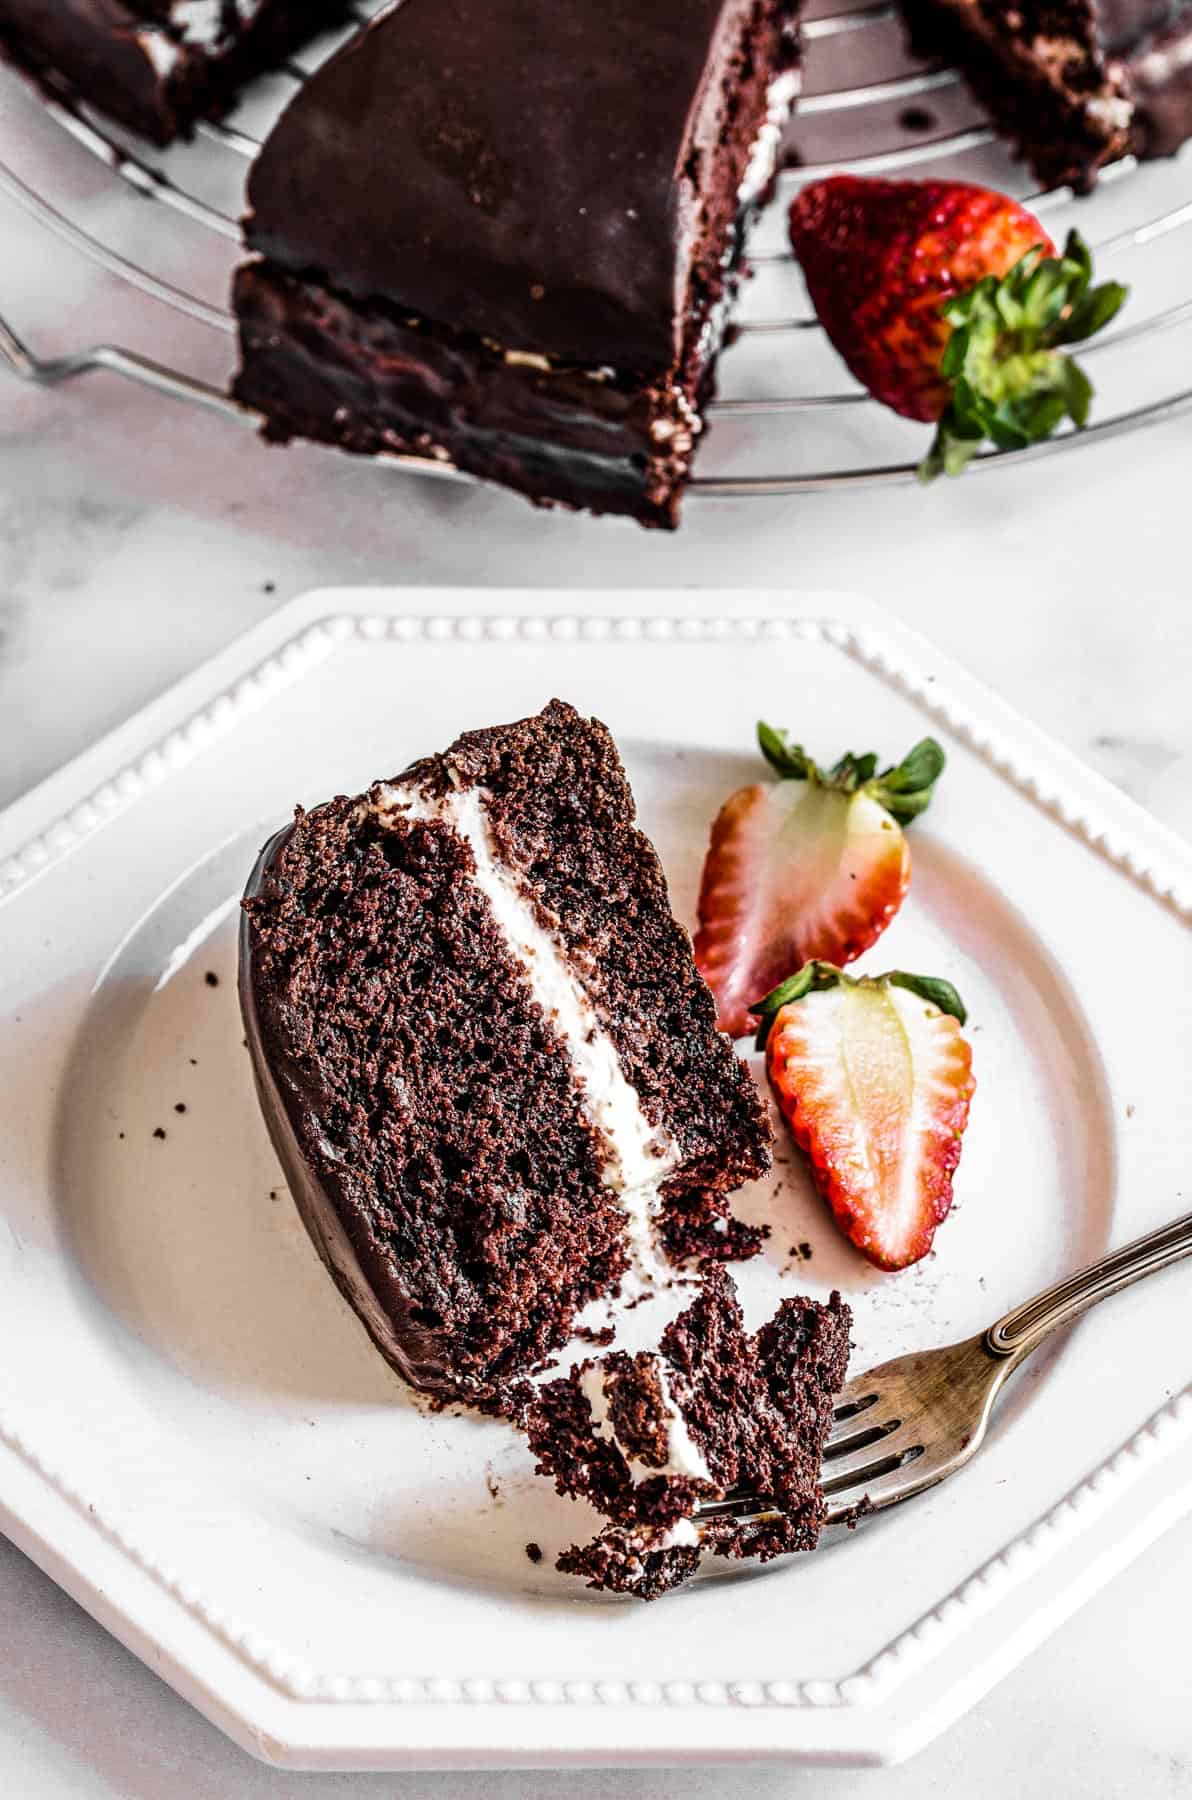 A slice of chocolate olive oil cake with strawberries.